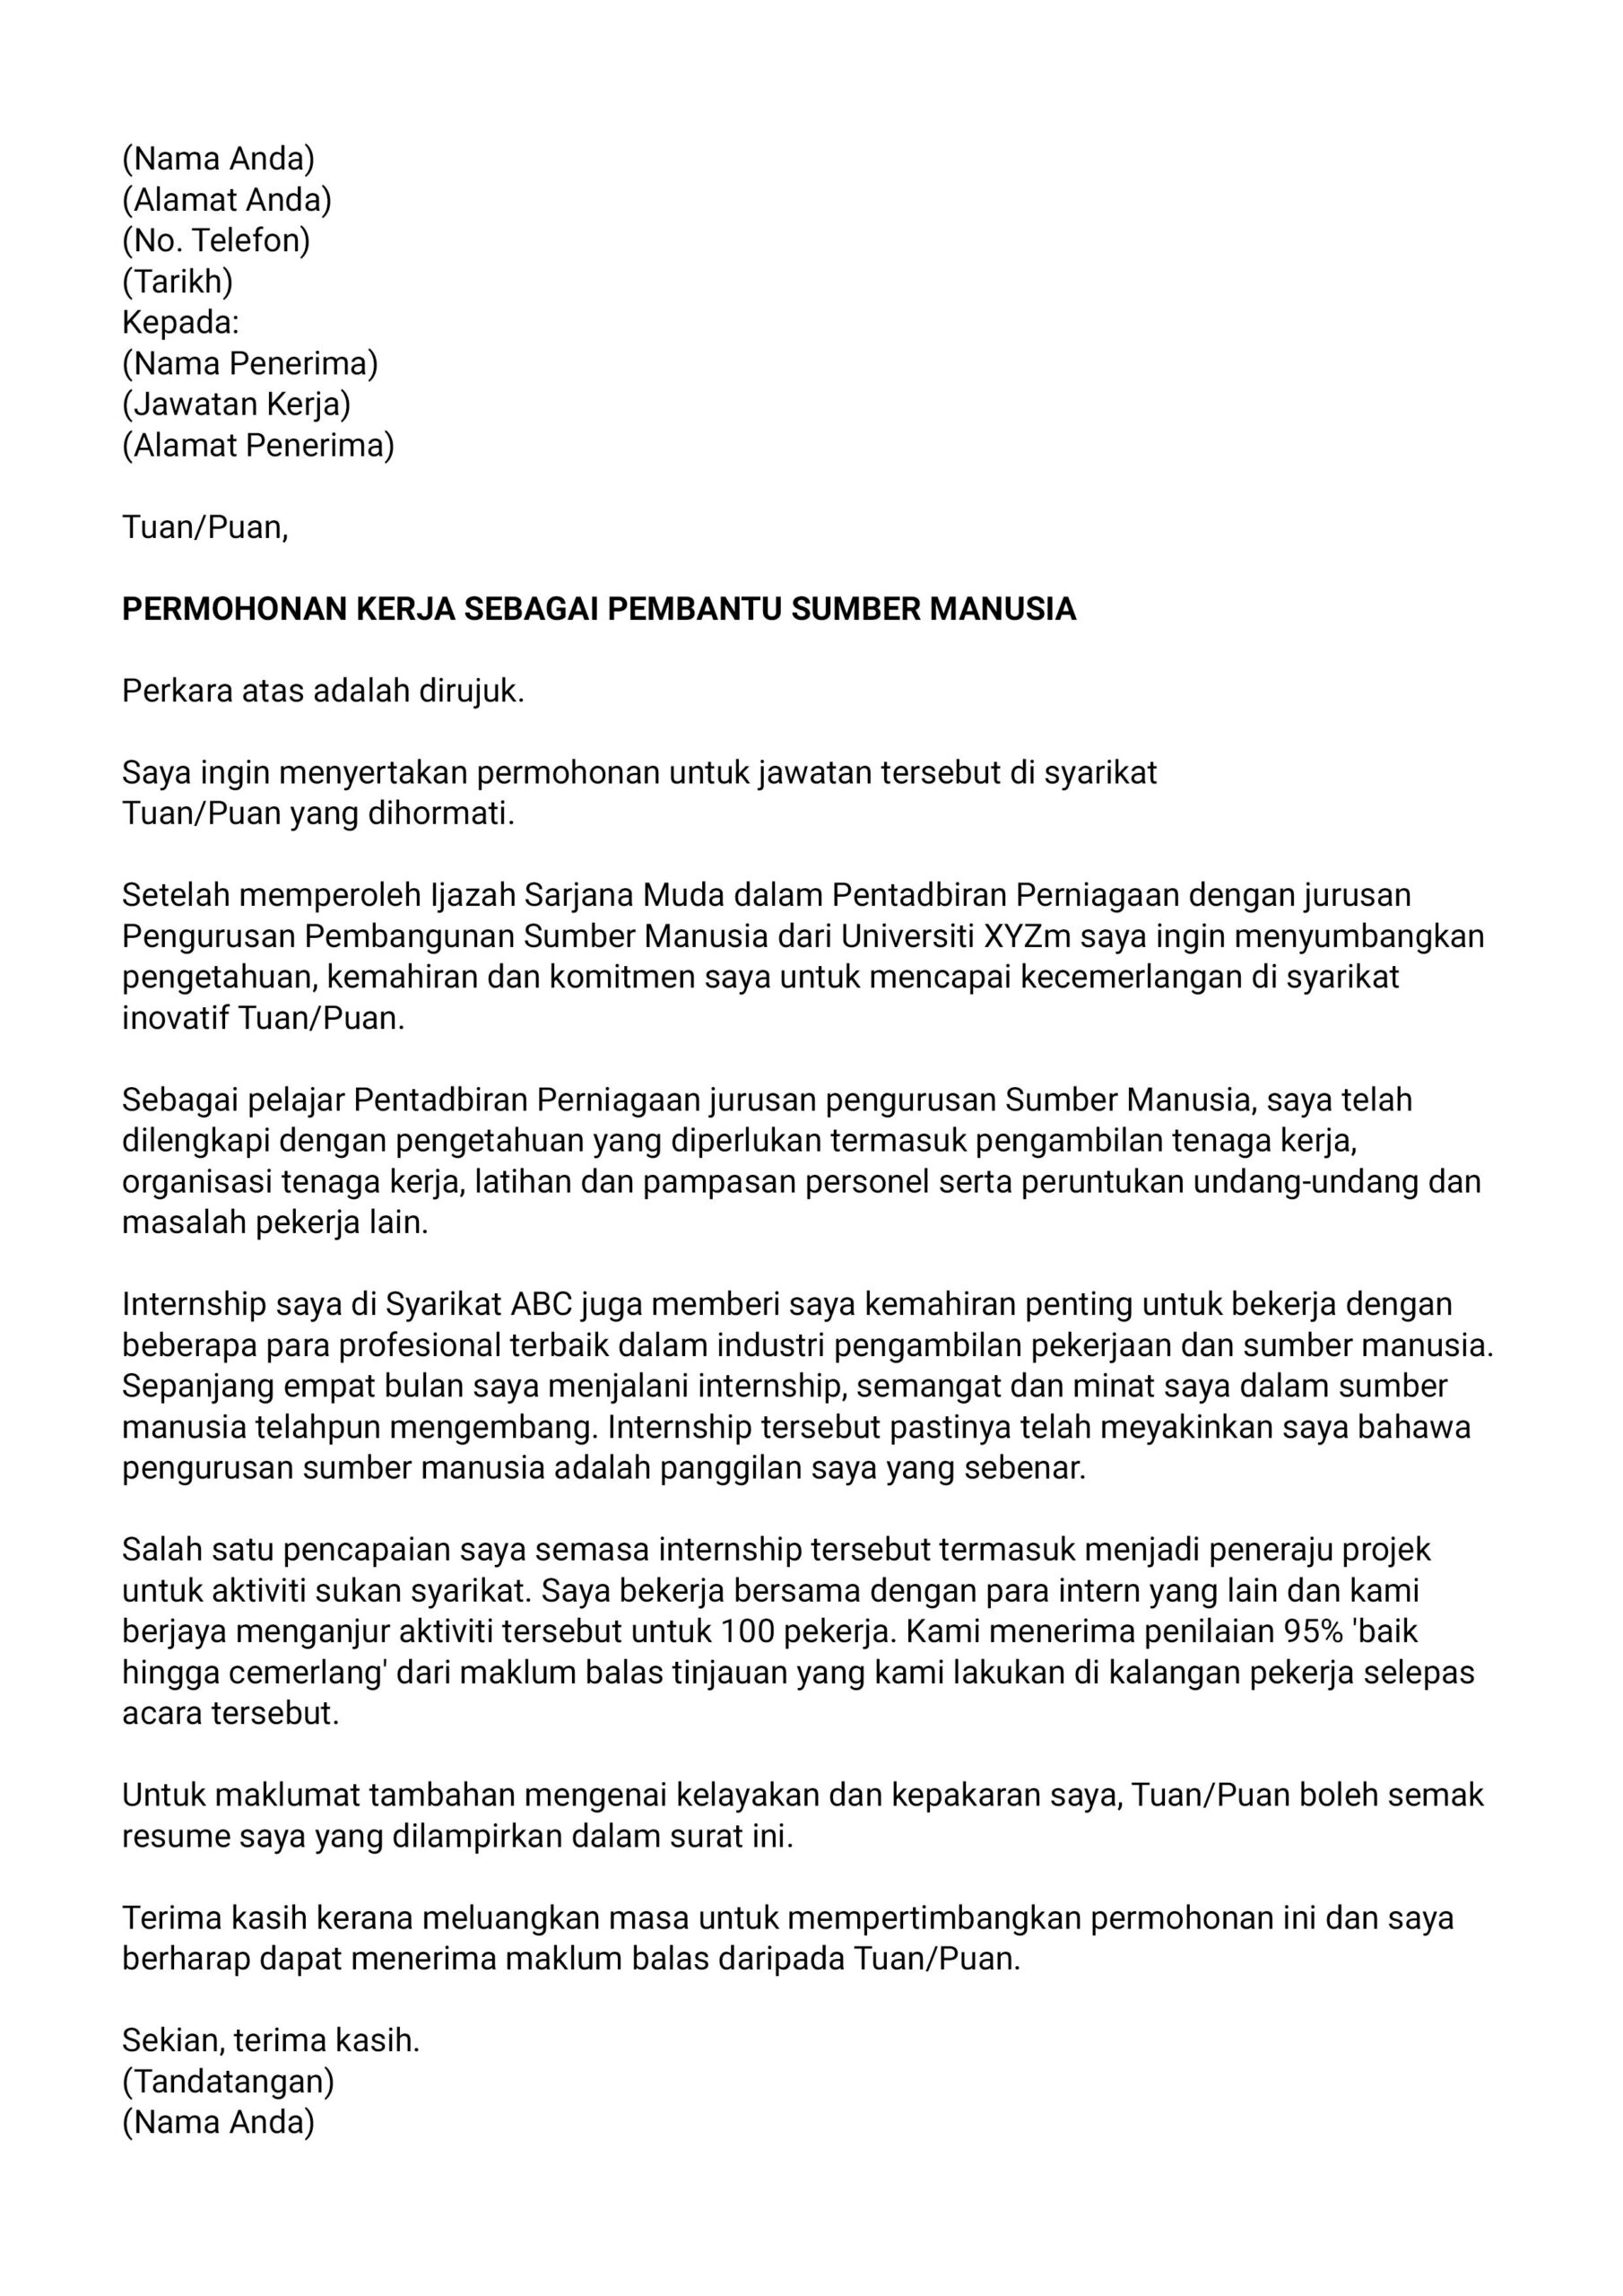 cover letter in malay translation